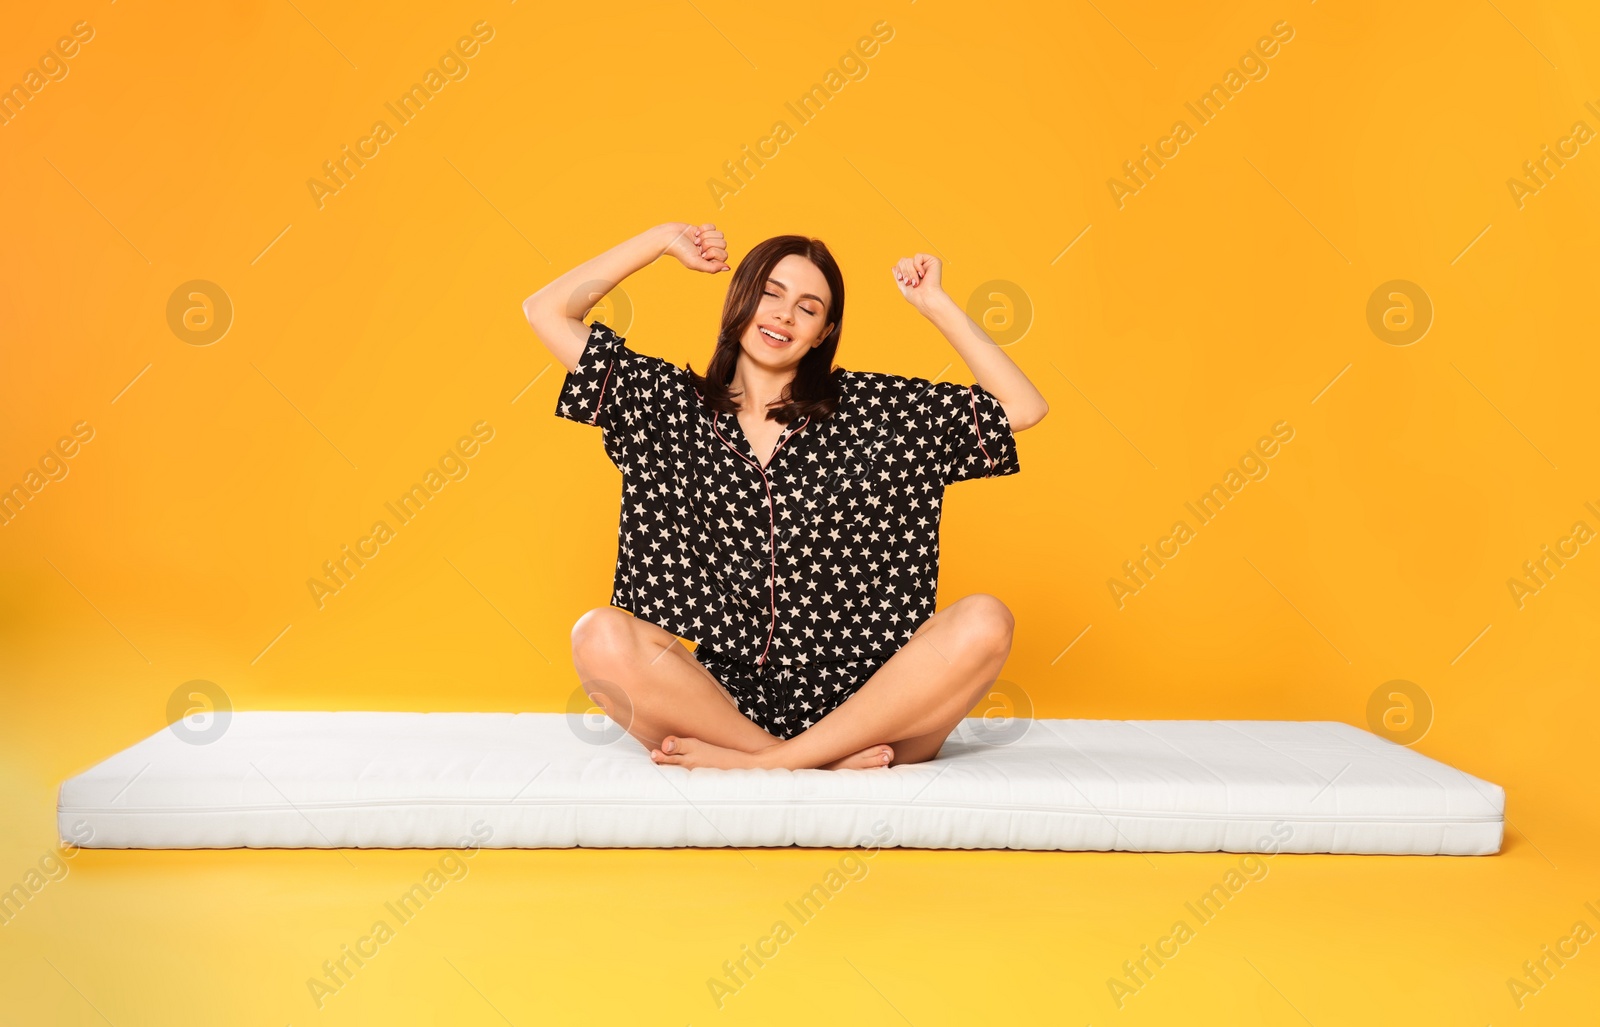 Photo of Young woman stretching on soft mattress against orange background